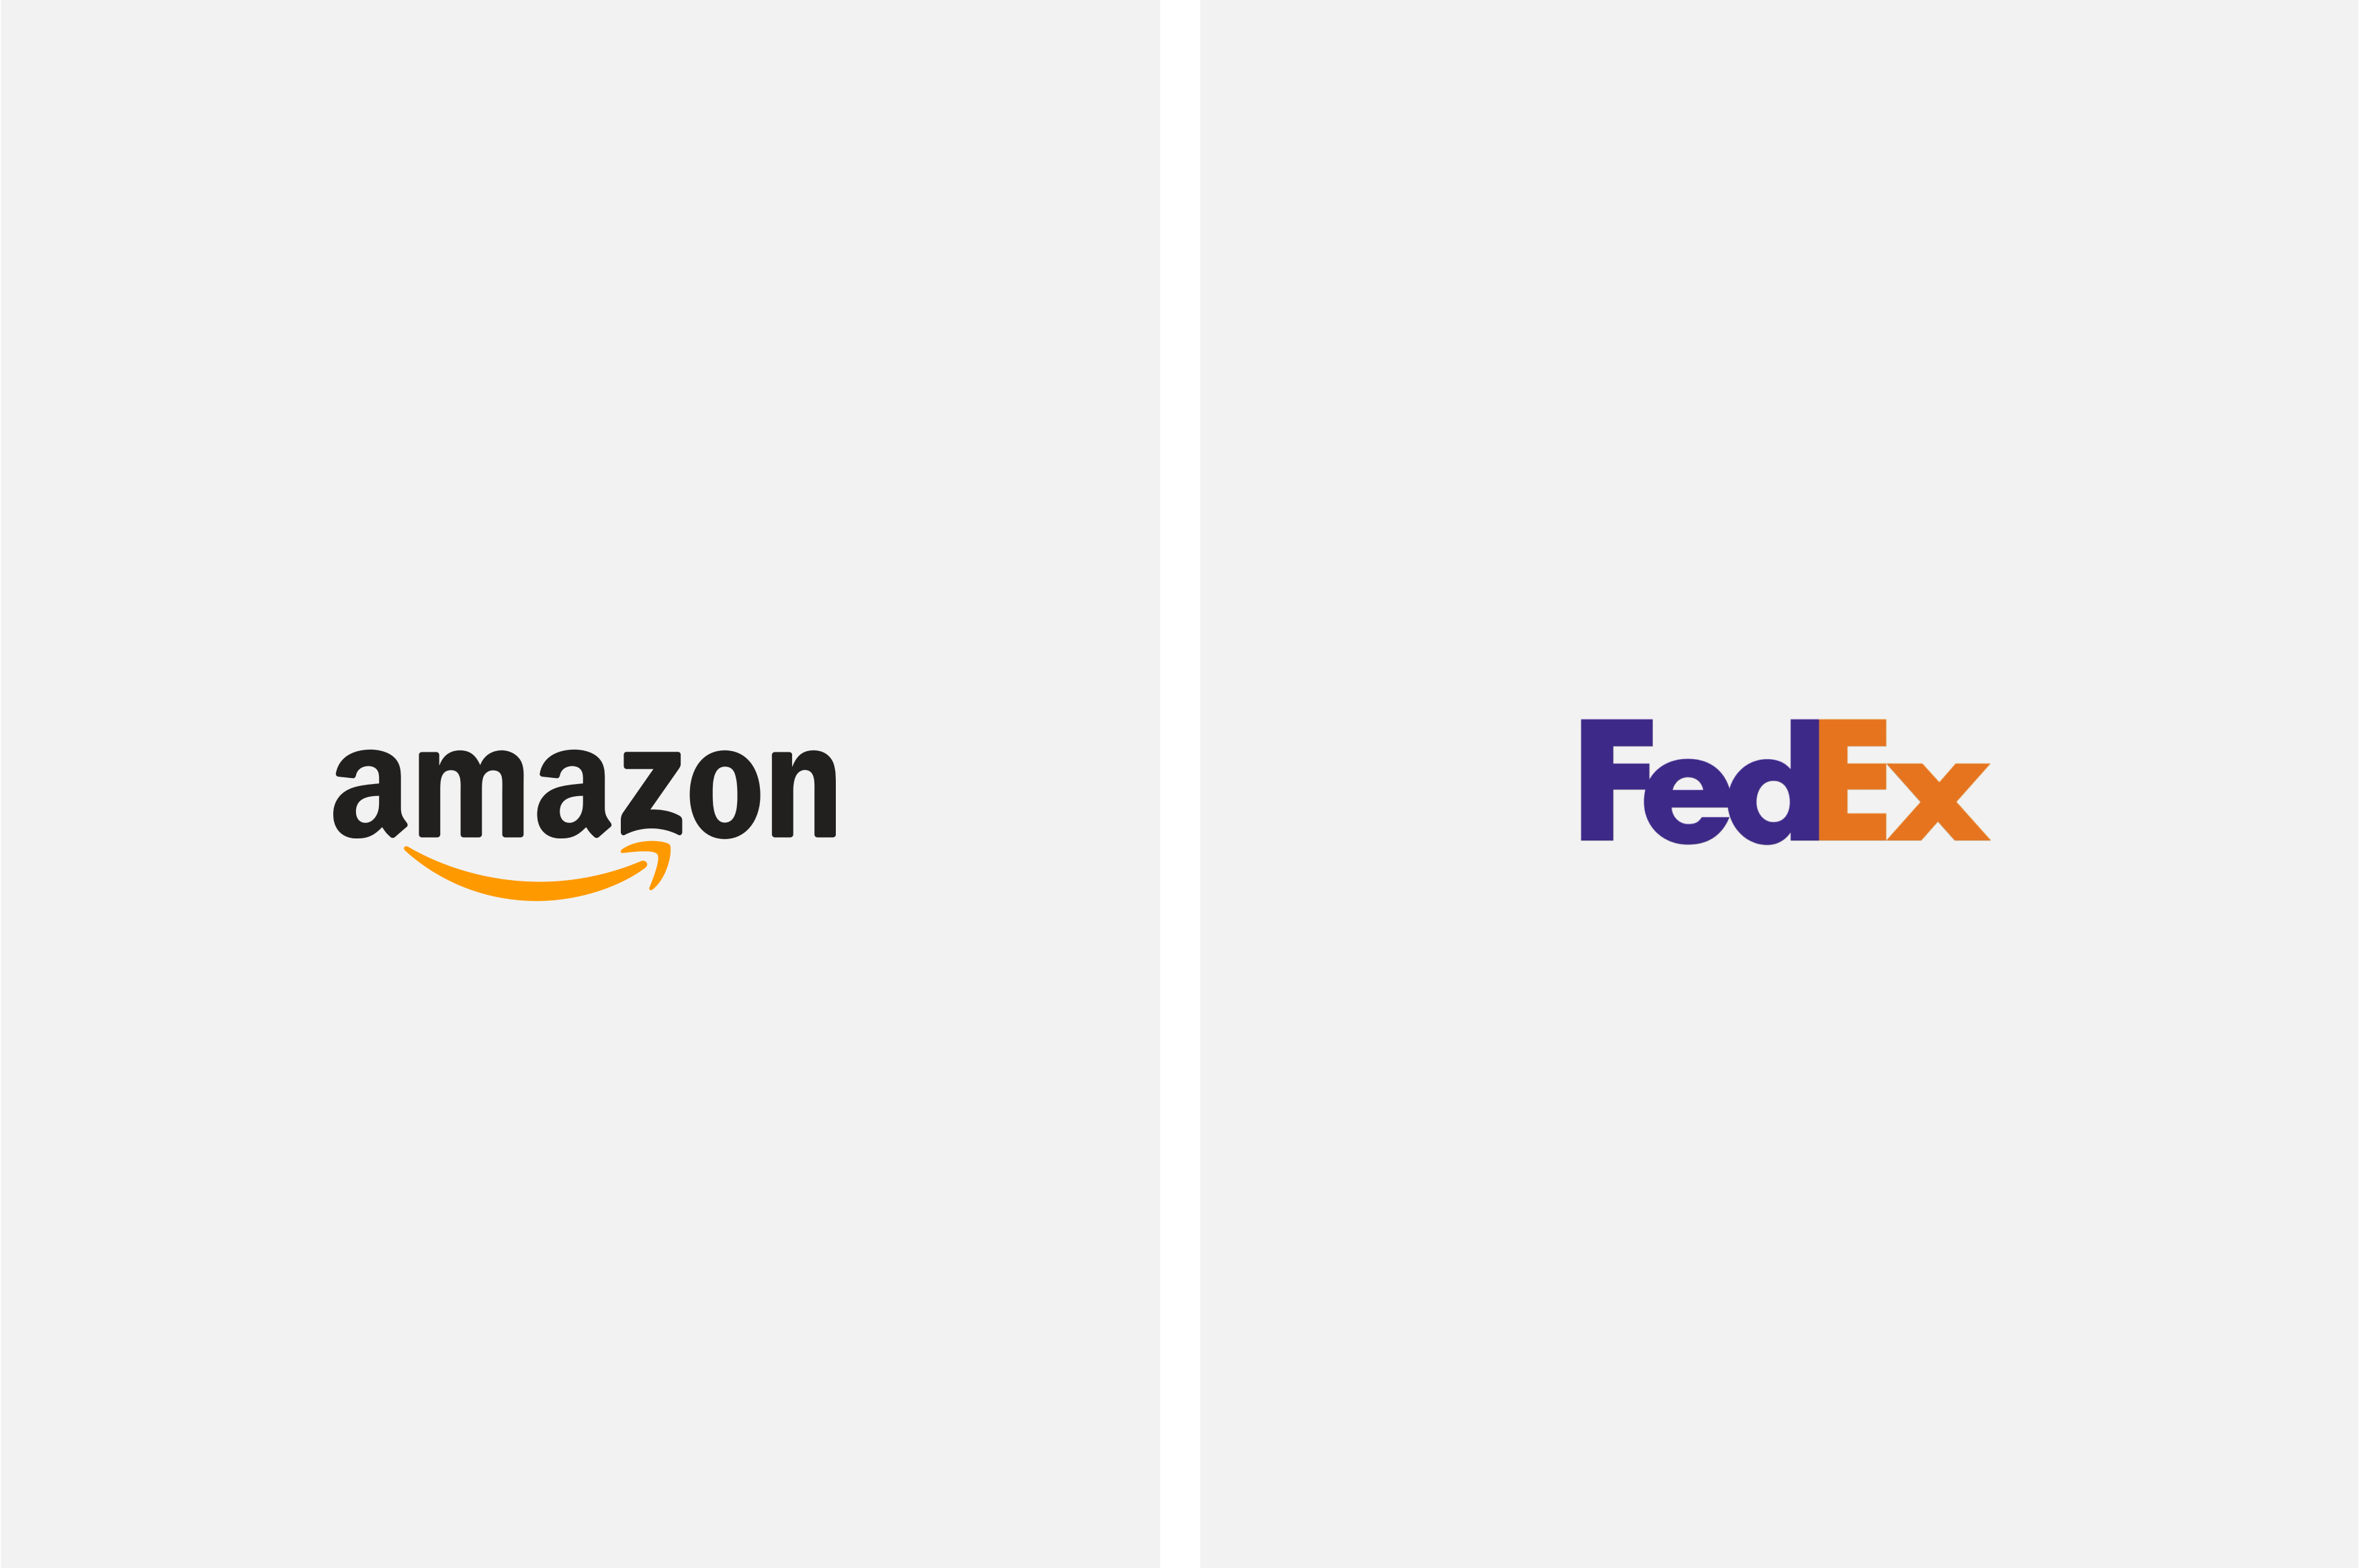 amazon logo with an arrow linking the a to the z and fedex logo with the arrow crated in the negative space between the E and the X